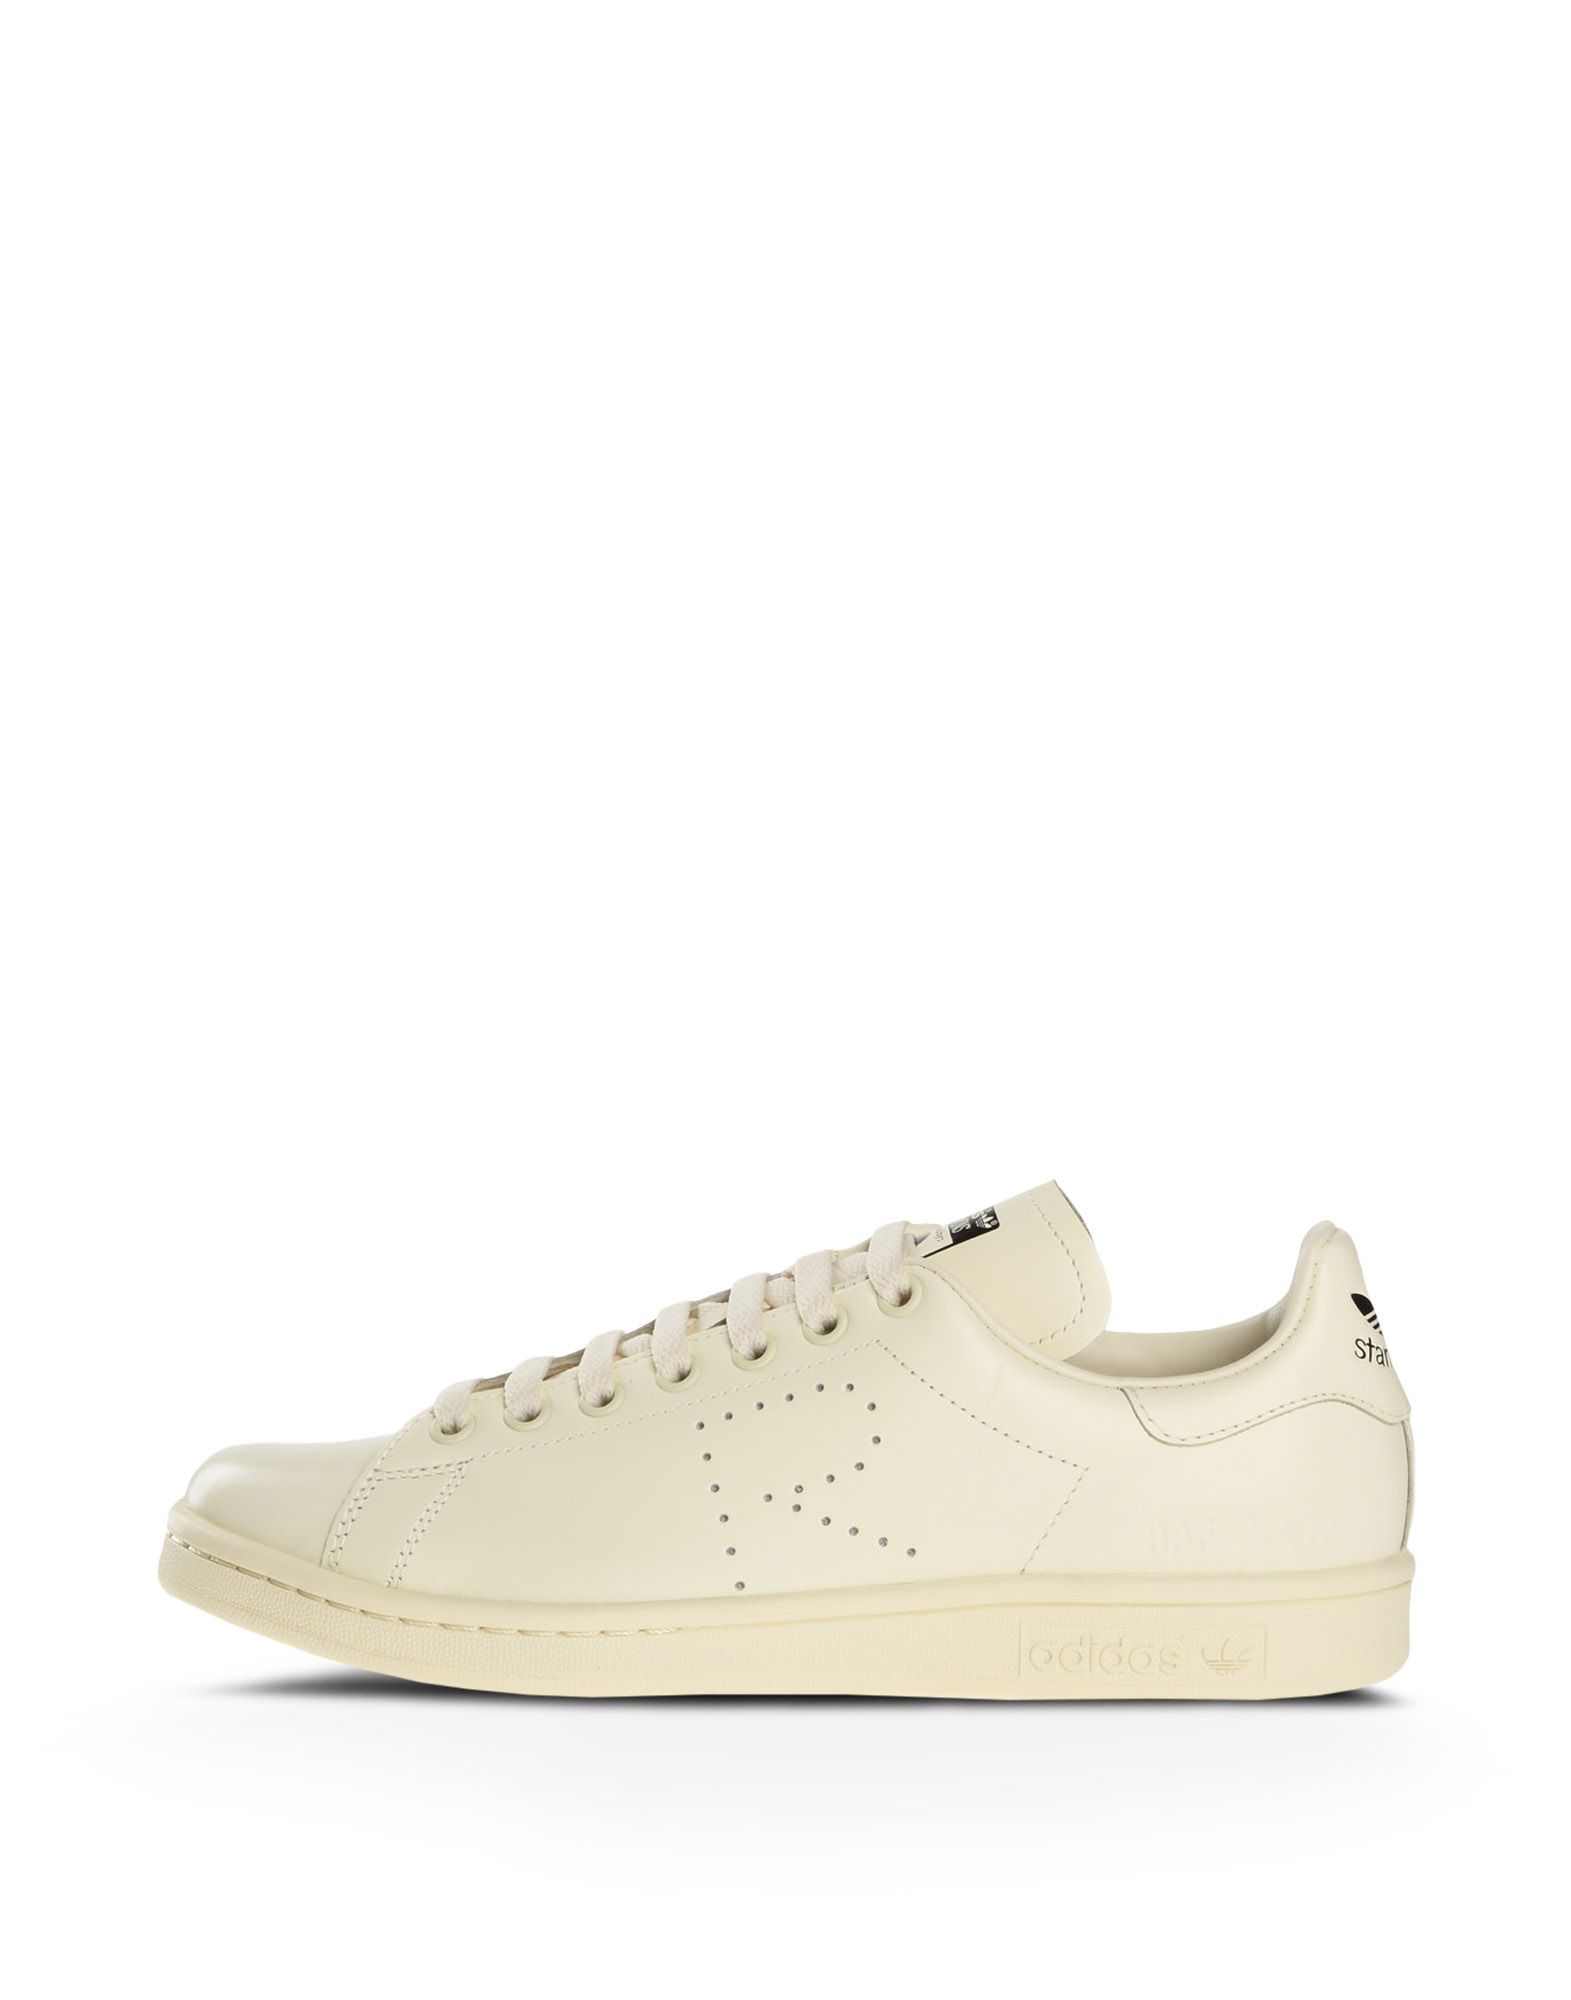 RAF SIMONS STAN SMITH Trainers | Adidas Y-3 Official Store